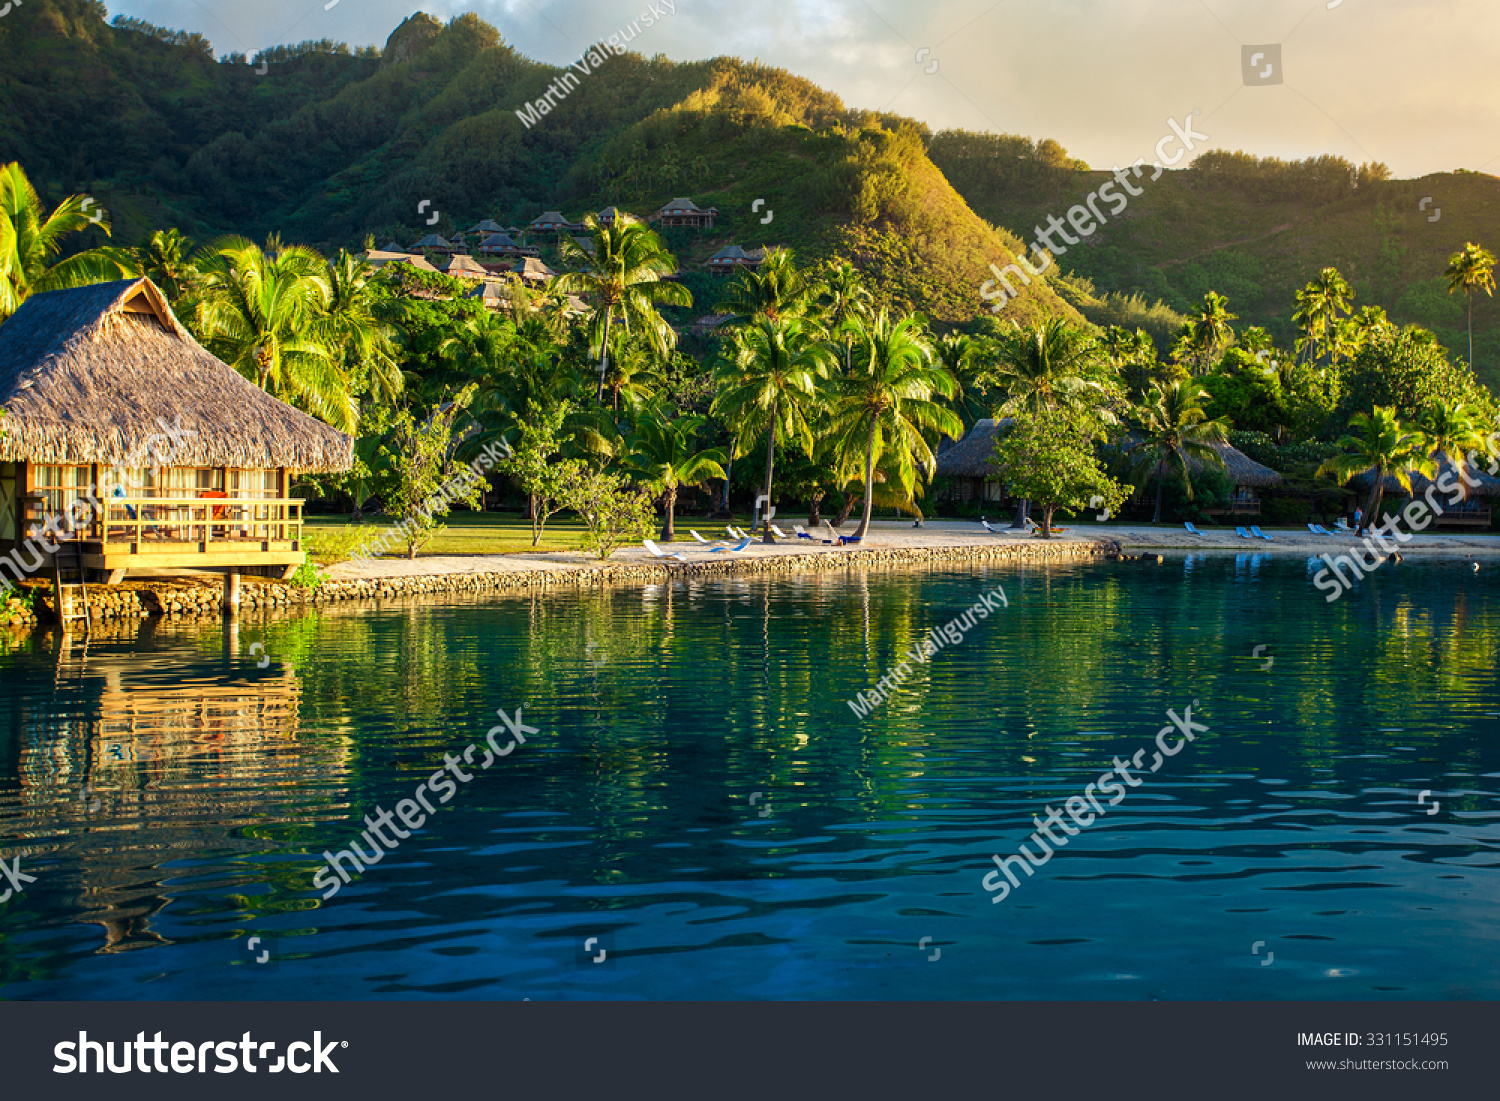 stock-photo-villas-in-a-tropical-resort-and-with-palm-trees-reflected-in-the-ocean-during-sunset-331151495.jpg